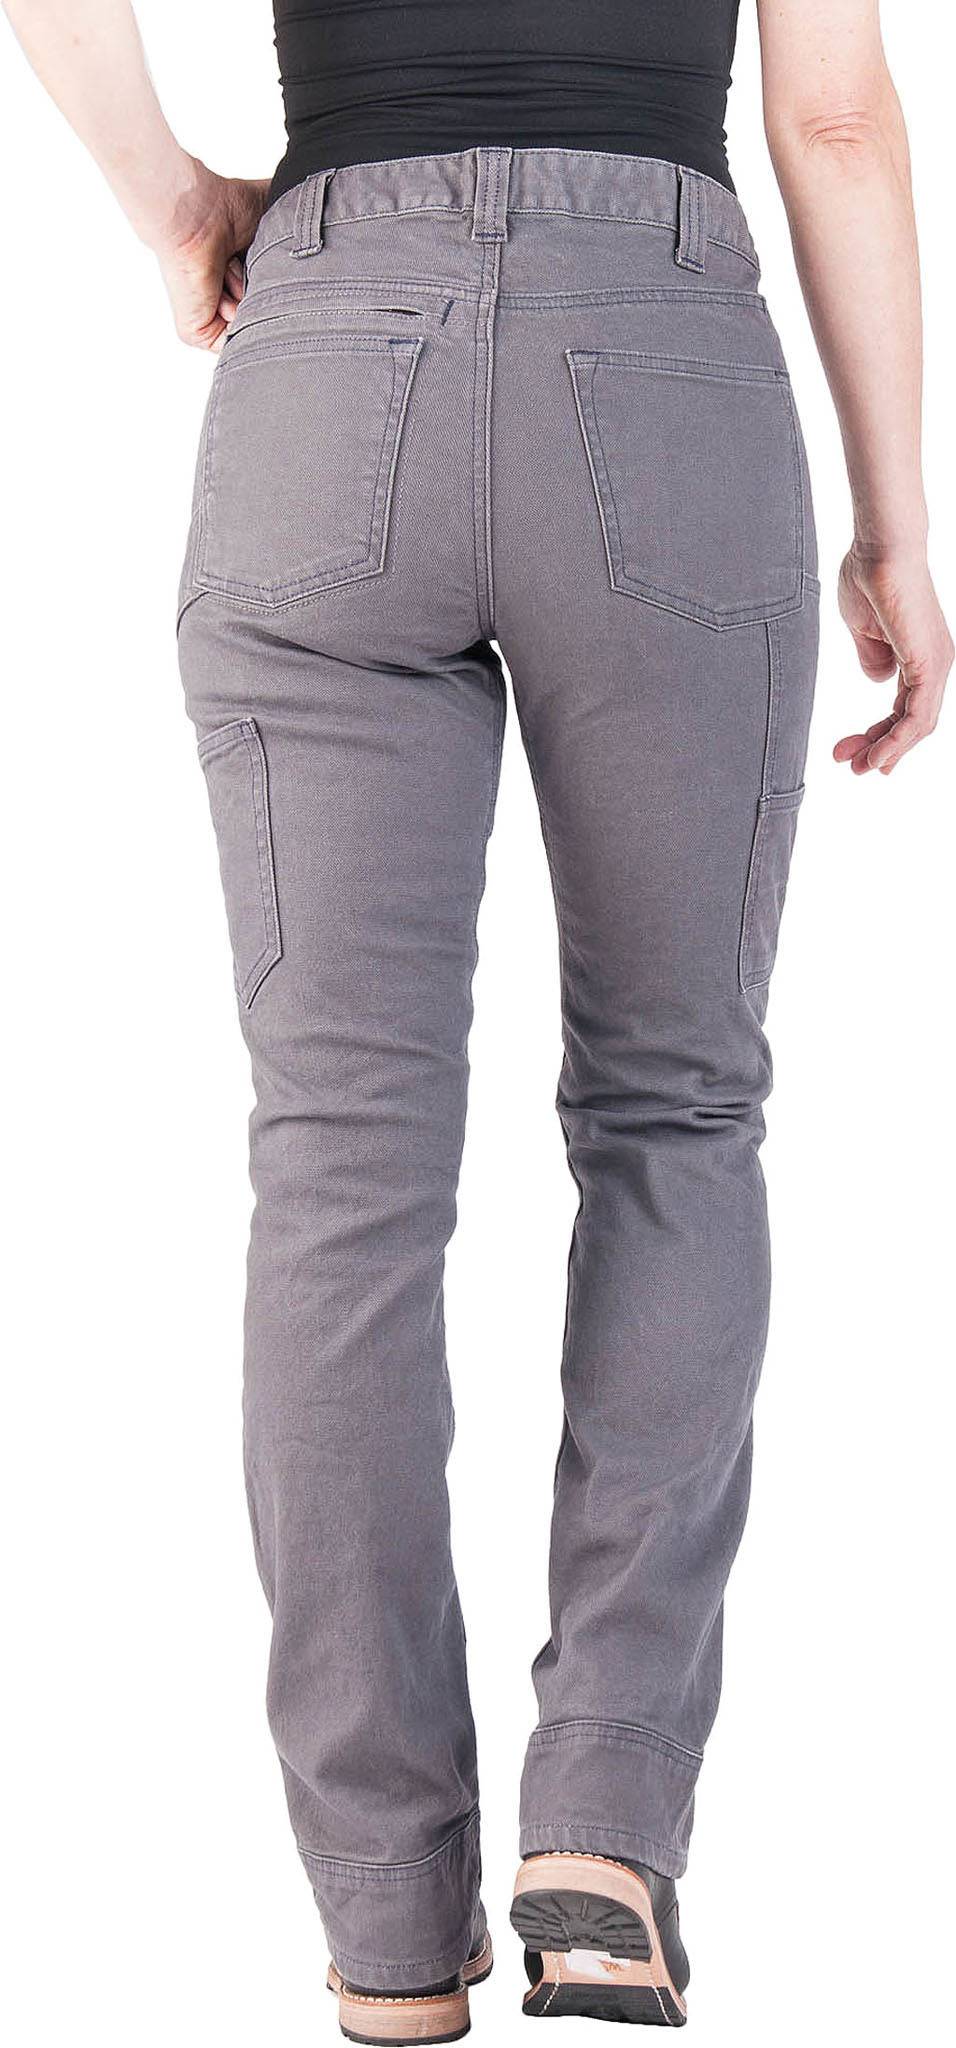 Dovetail Workwear Women's Grey Canvas Work Pants (14 X 32) in the